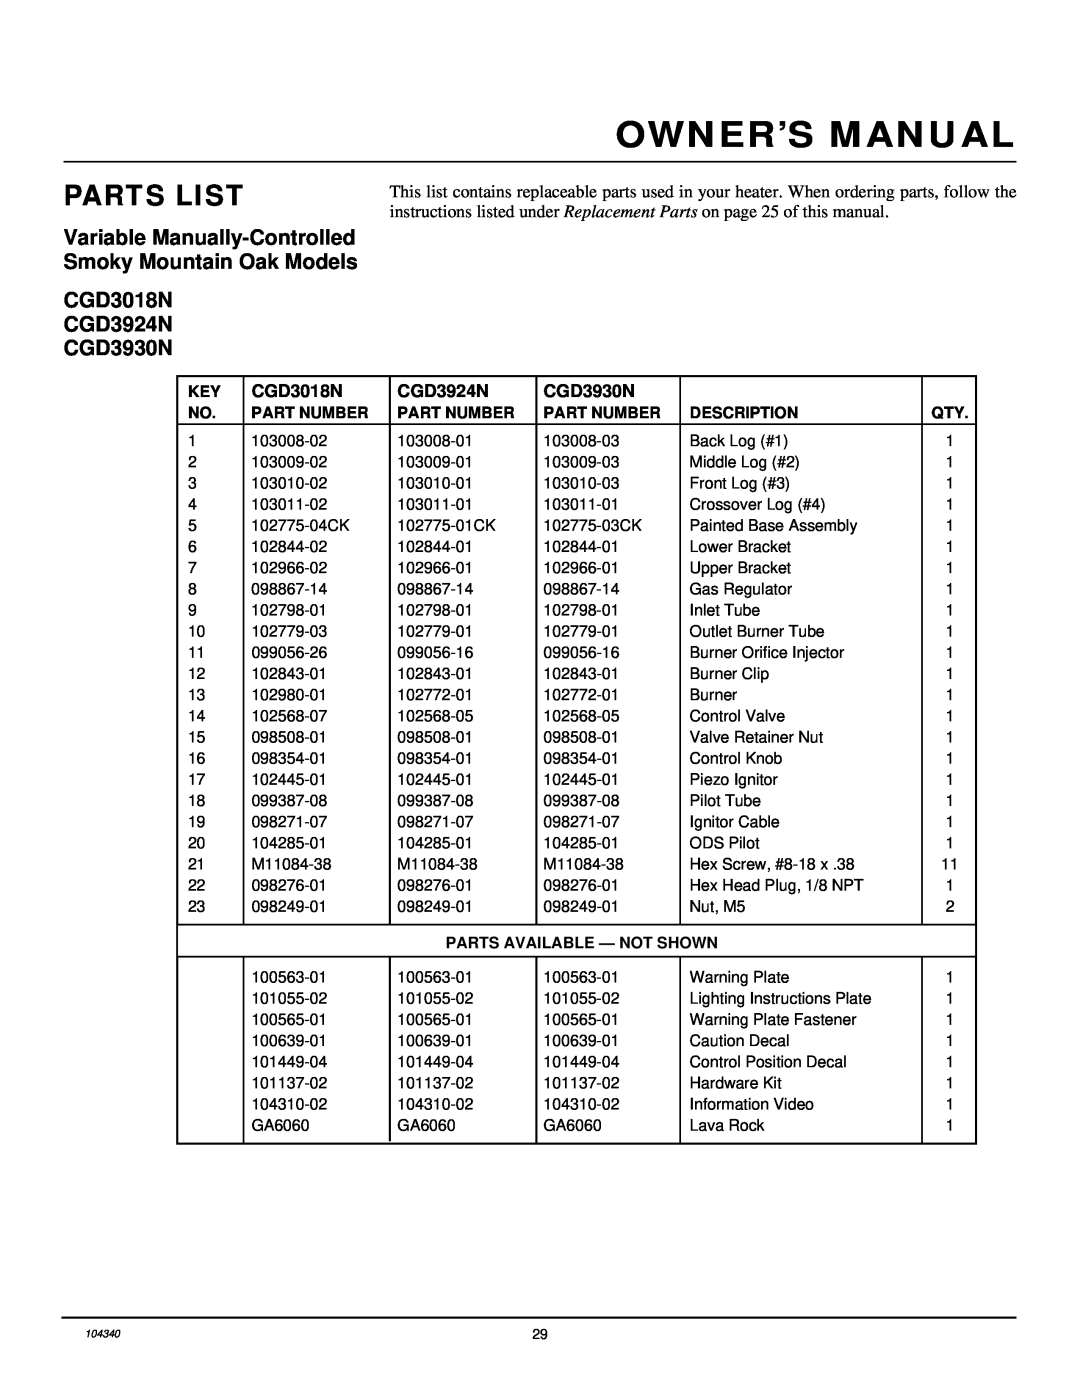 Desa CGD3930NT, CCL3924NT Parts List, CGD3018N CGD3924N CGD3930N, Part Number, Description, Parts Available - Not Shown 